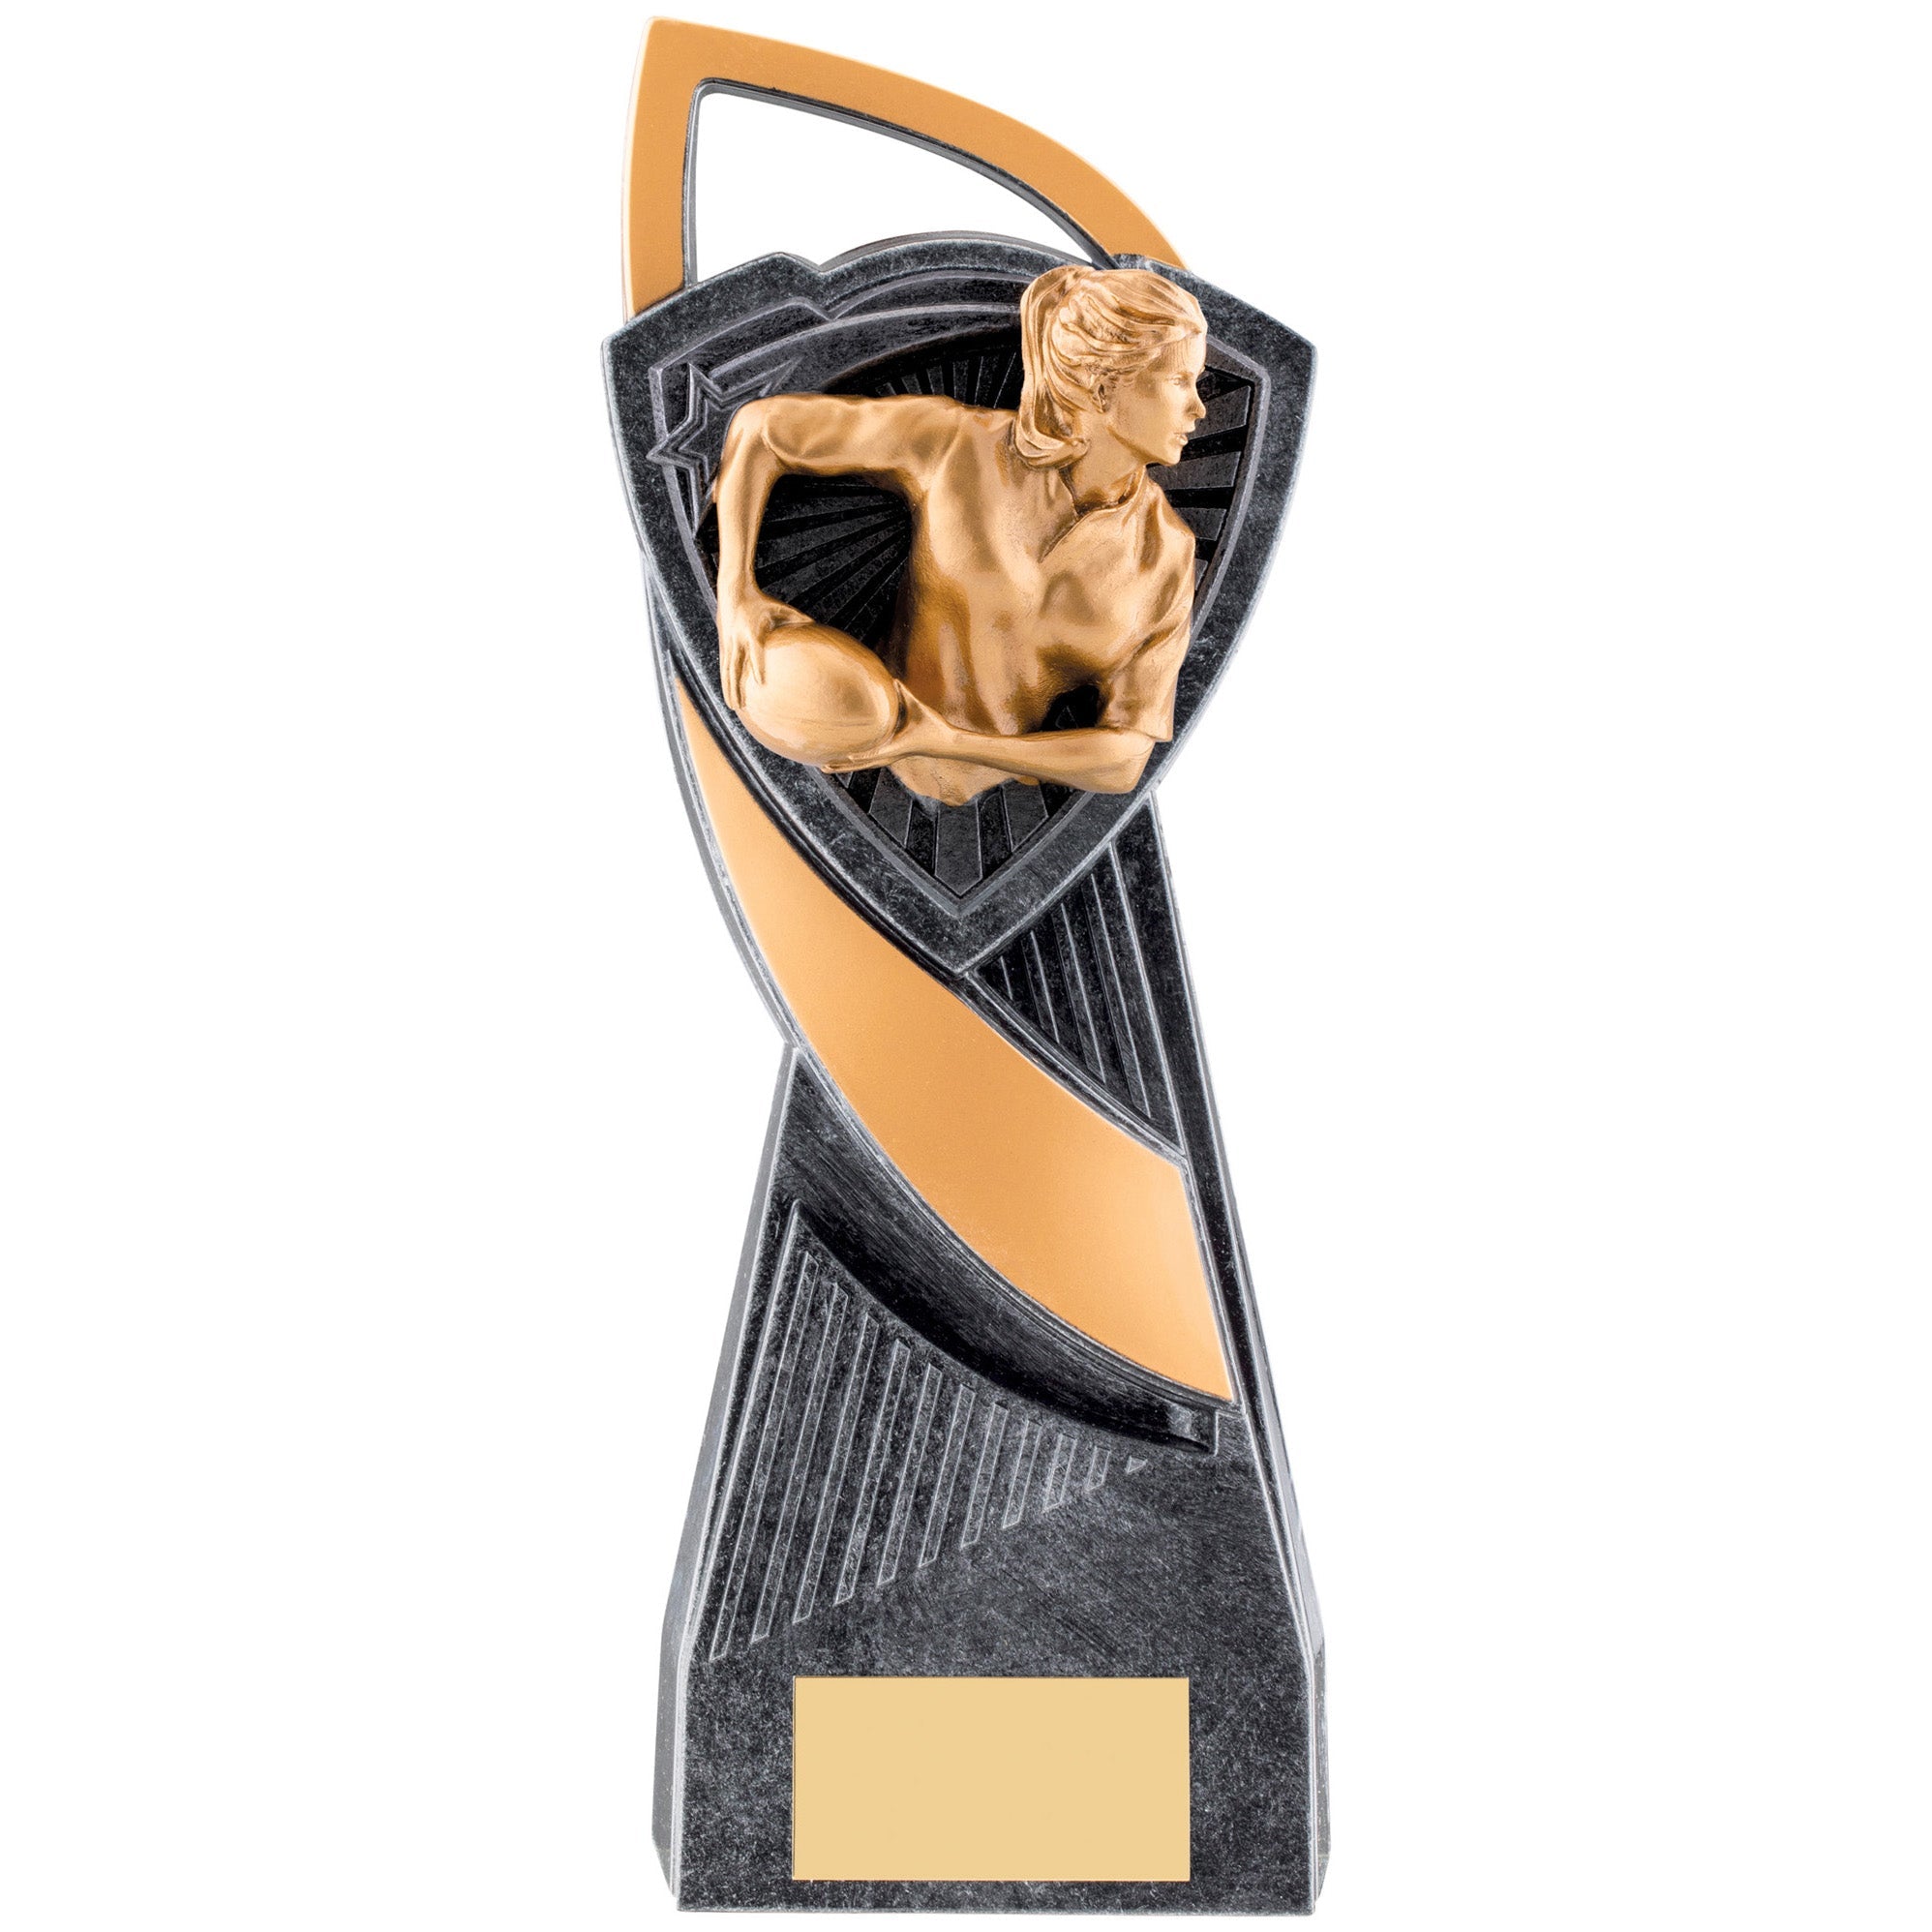 Utopia Female Rugby Trophy (Gold/Silver)